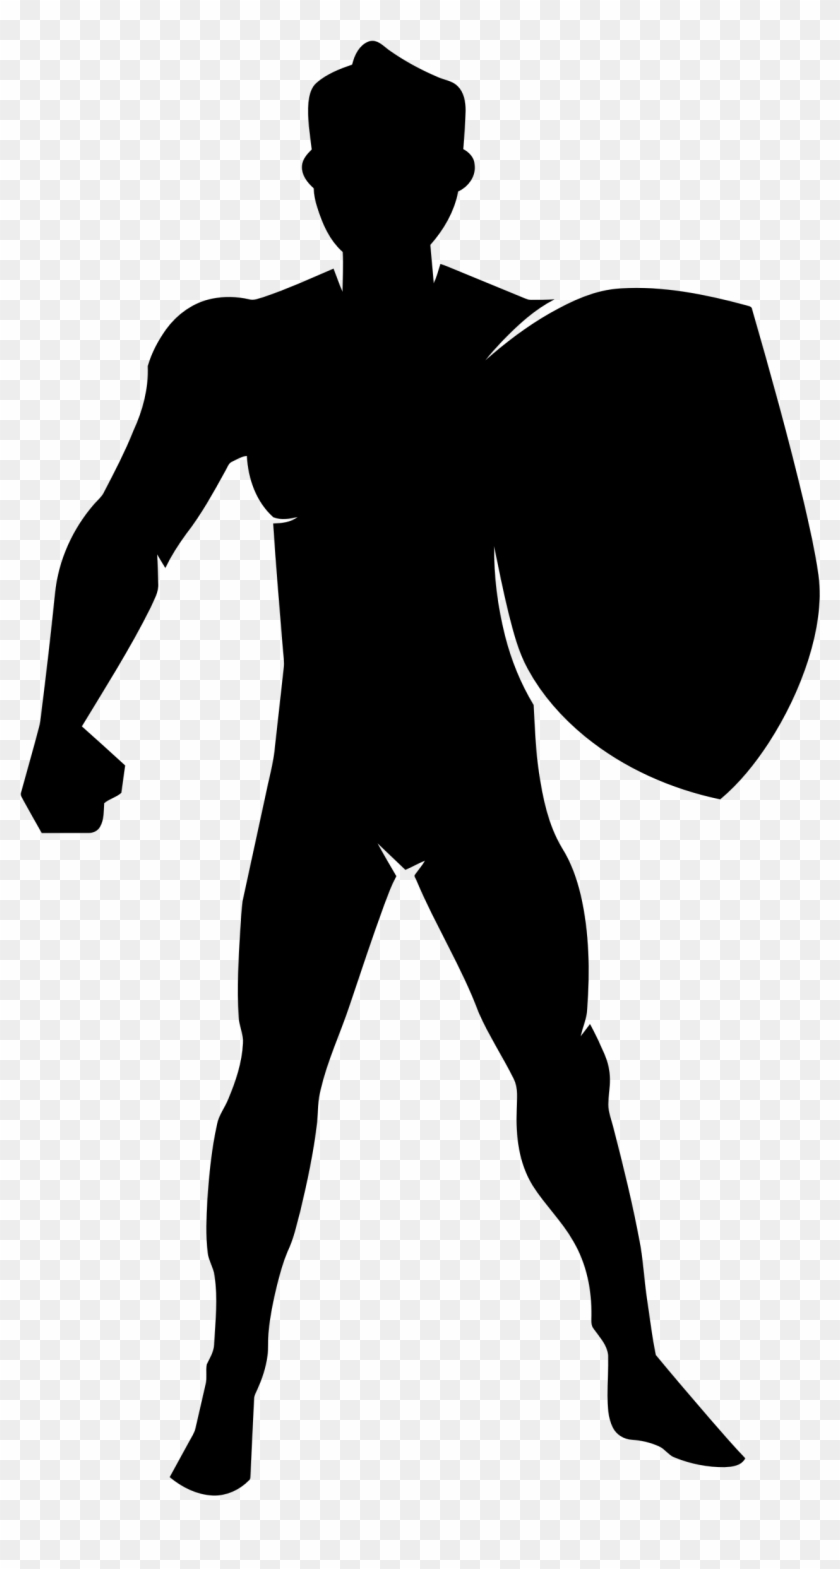 With Shield Silhouette - Fight Silhouette Png #160030